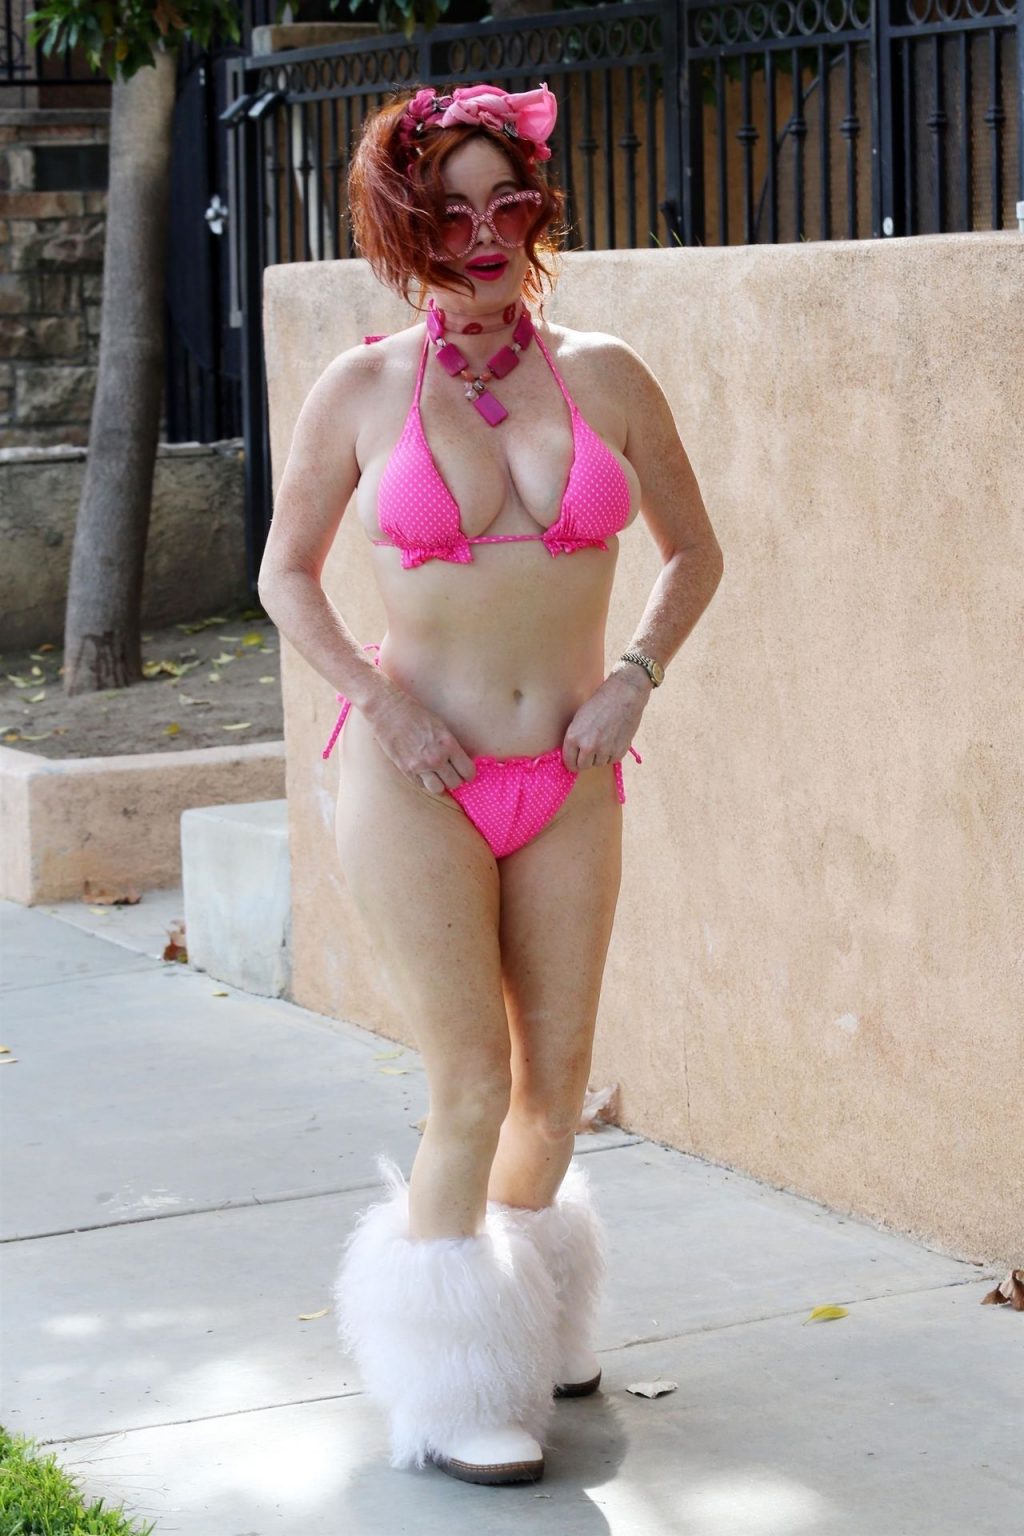 Phoebe Price Shows Off Her Curves in a Pink Bikini (42 Photos)